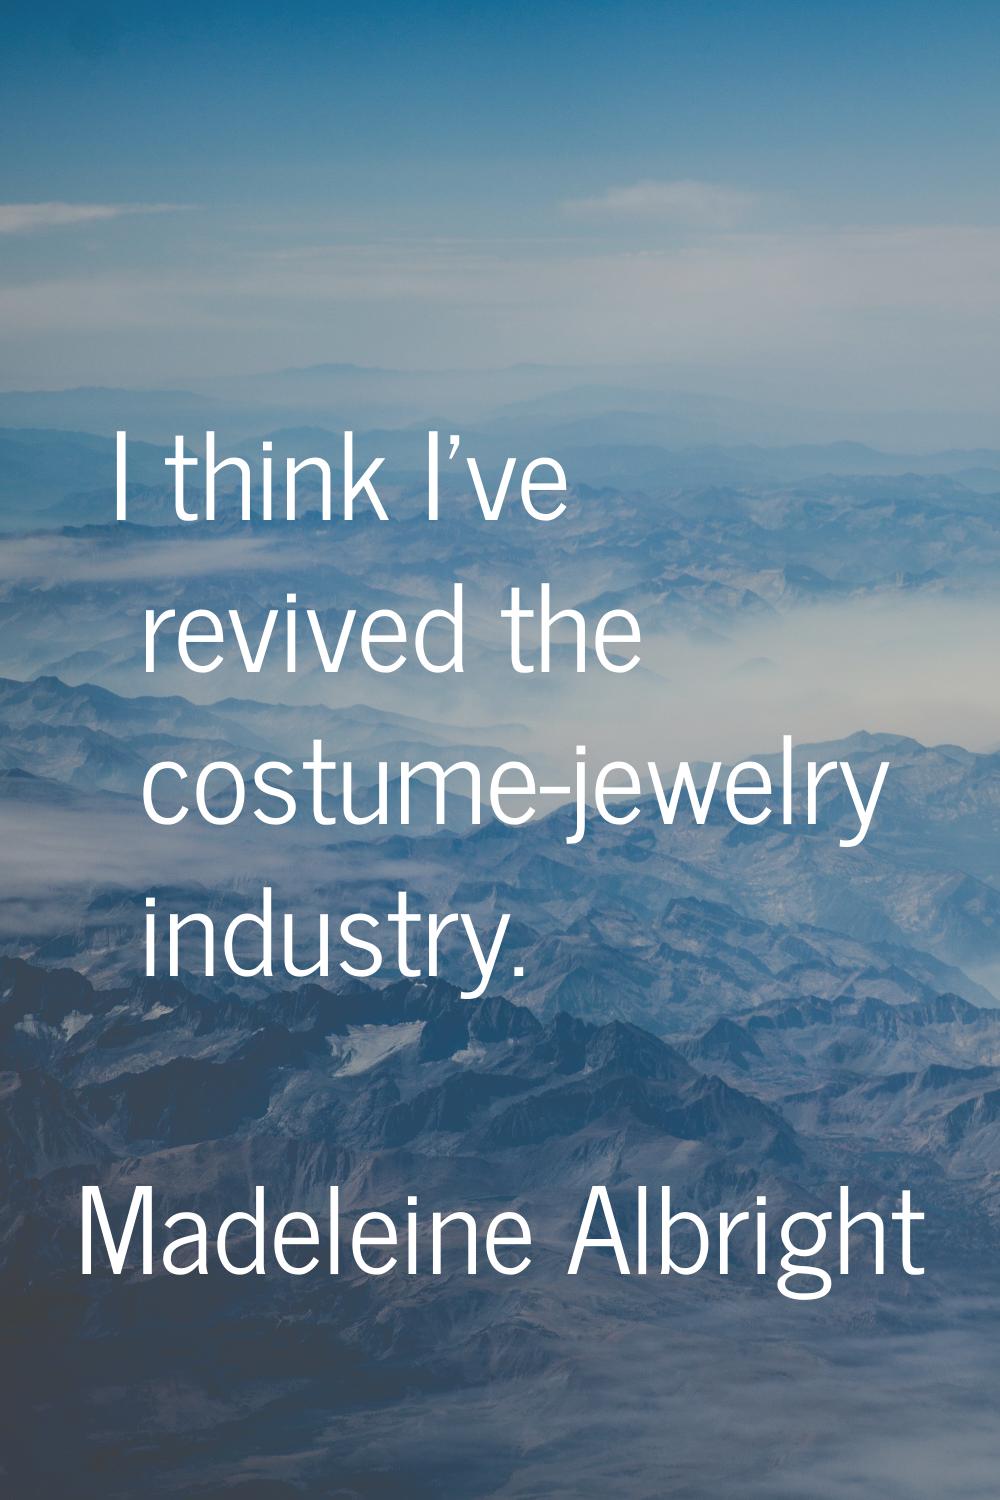 I think I've revived the costume-jewelry industry.